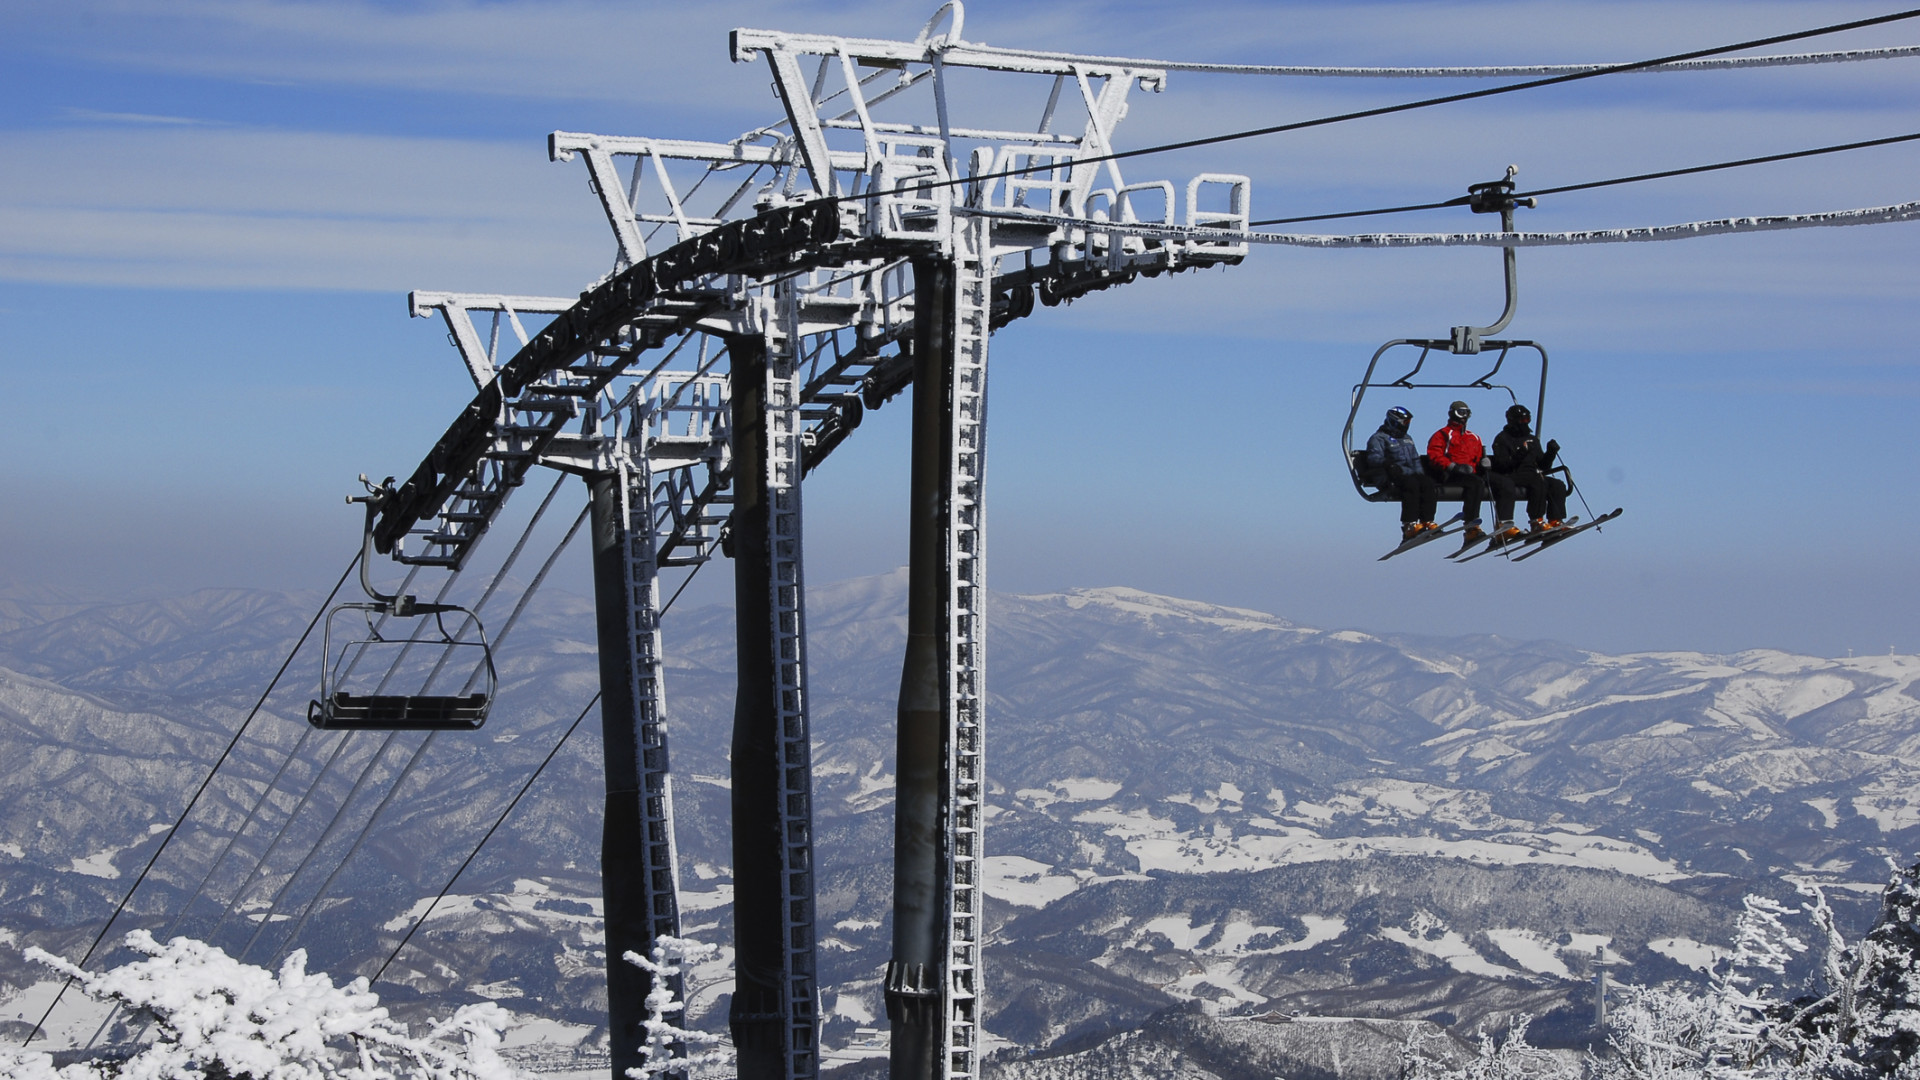 Skiiers on a lift a Yongpyeong, a resort which will likely see a boom after the Olympics in 2018